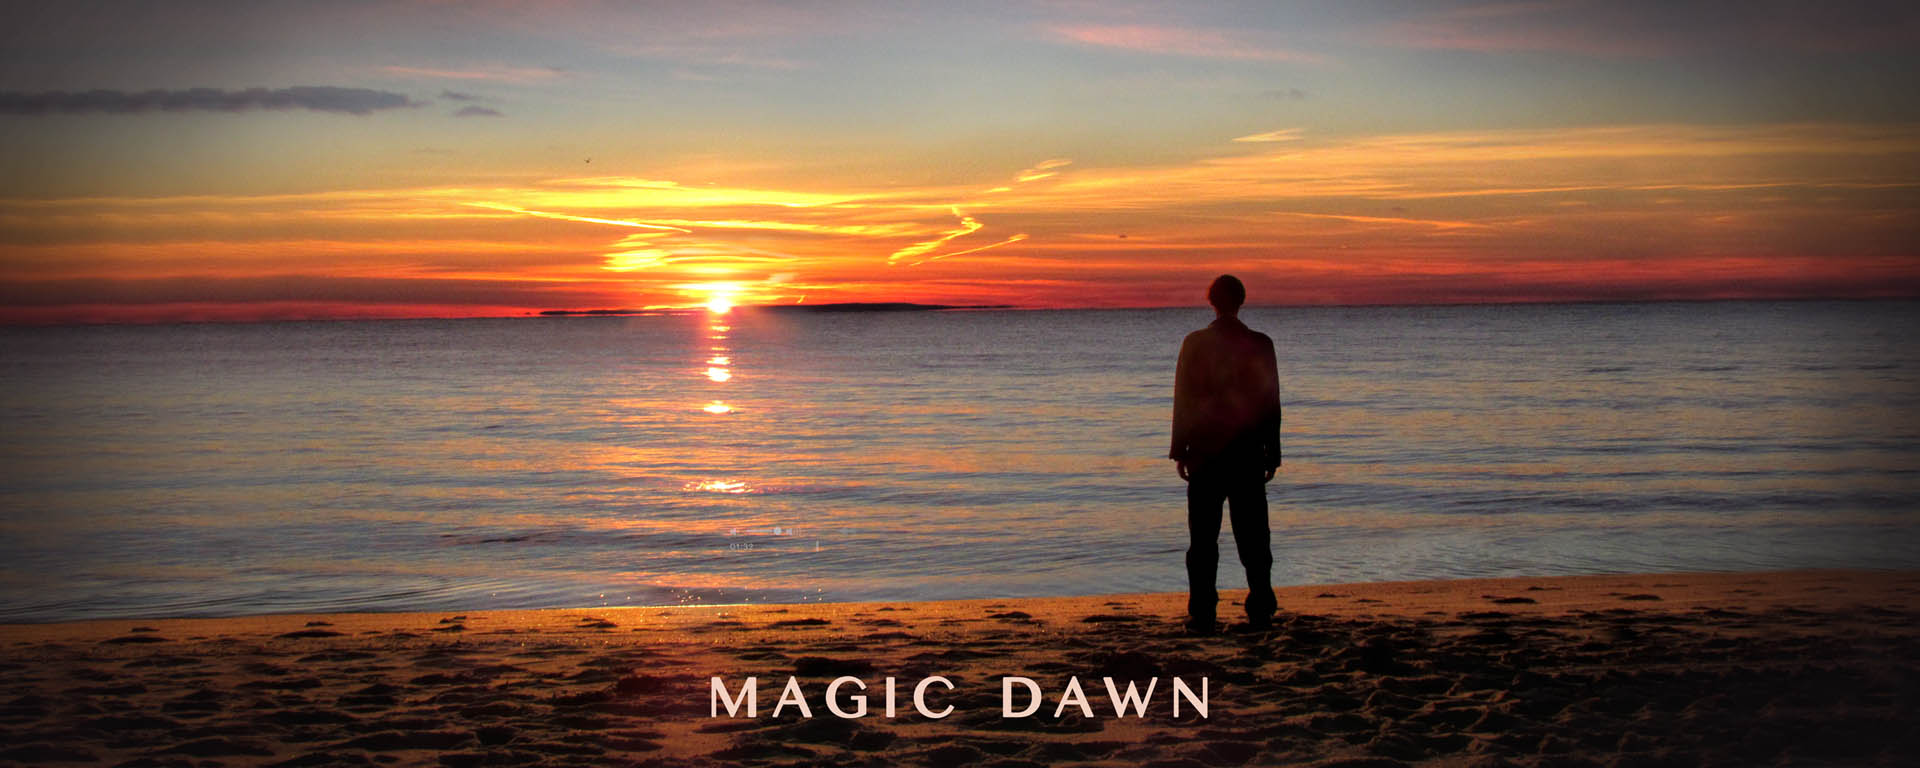 Poster of the Magic Dawn Pictures